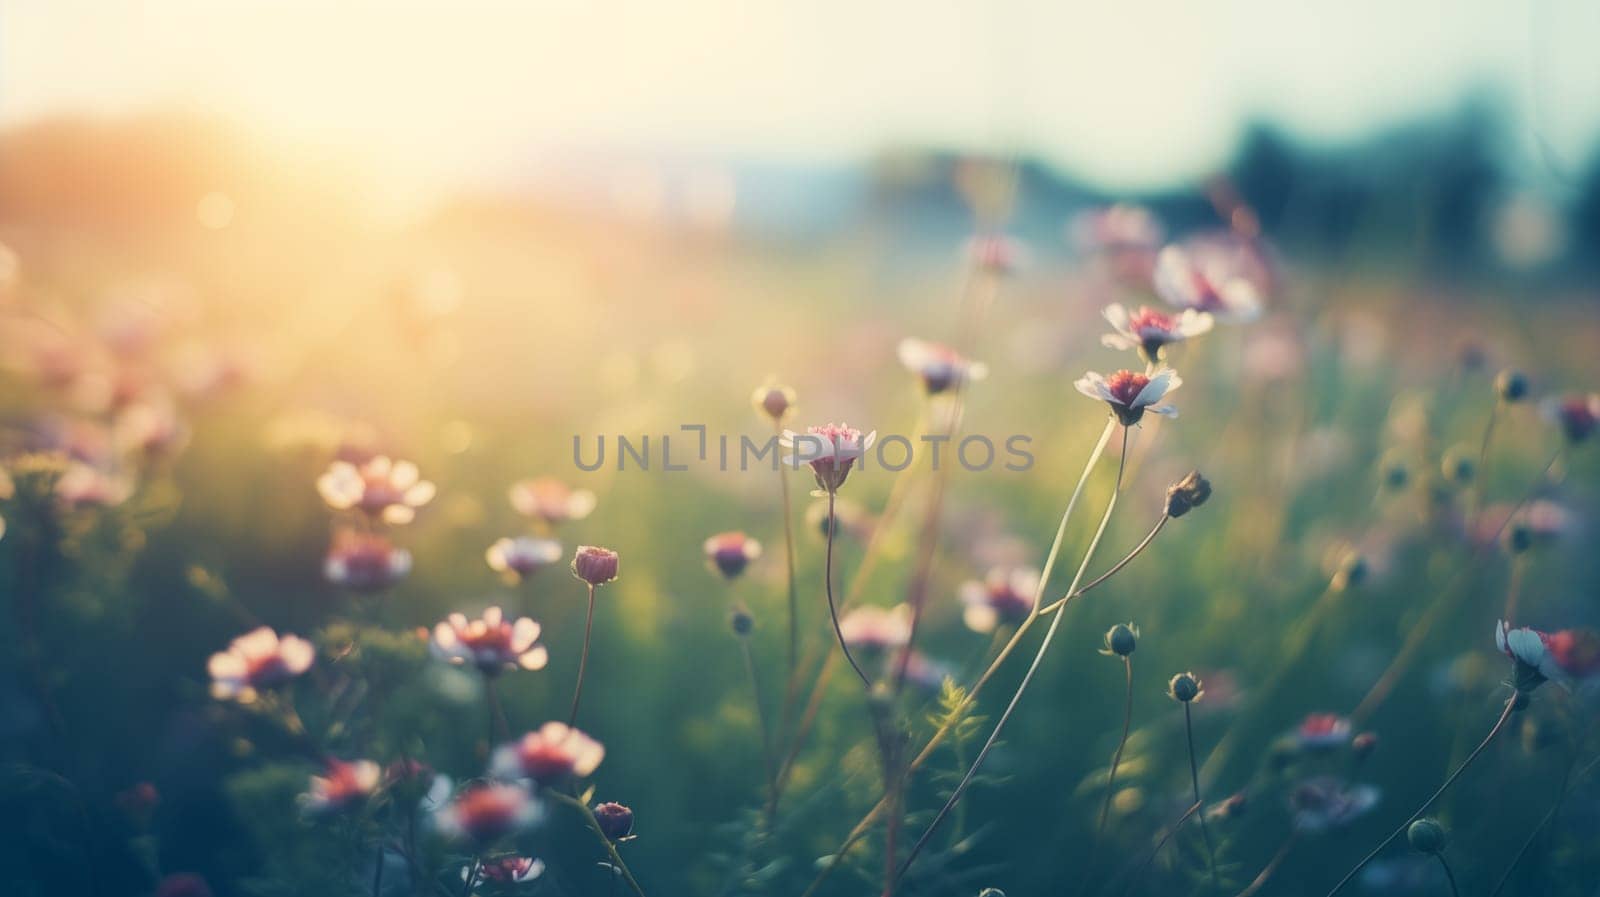 Wildflowers in the sunset light - vintage image by chrisroll